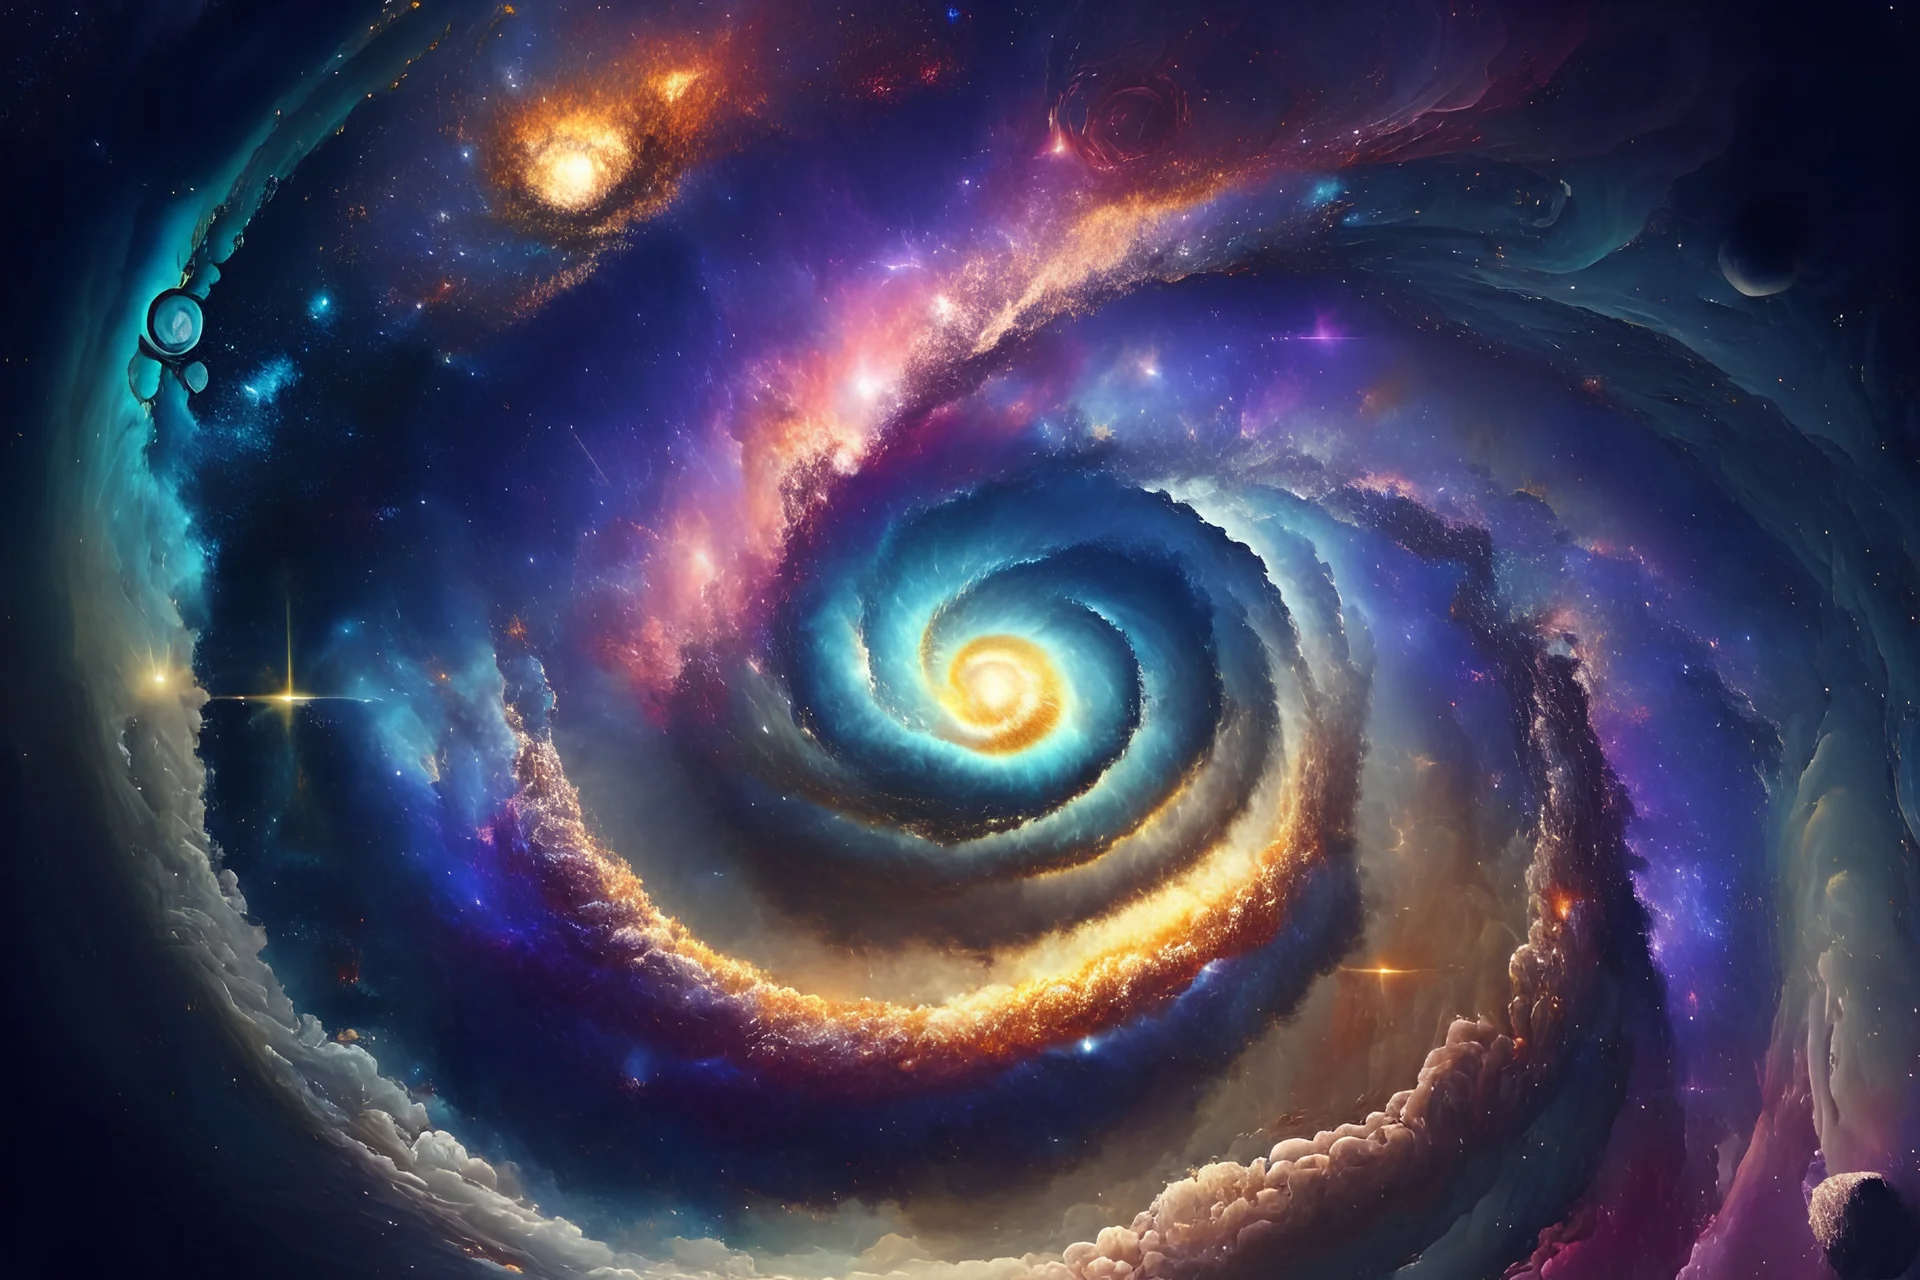 A stunning celestial scene, featuring a radiant, spiraling galaxy with vibrant, swirling colors, surrounded by a dazzling array of stars and other celestial bodies.